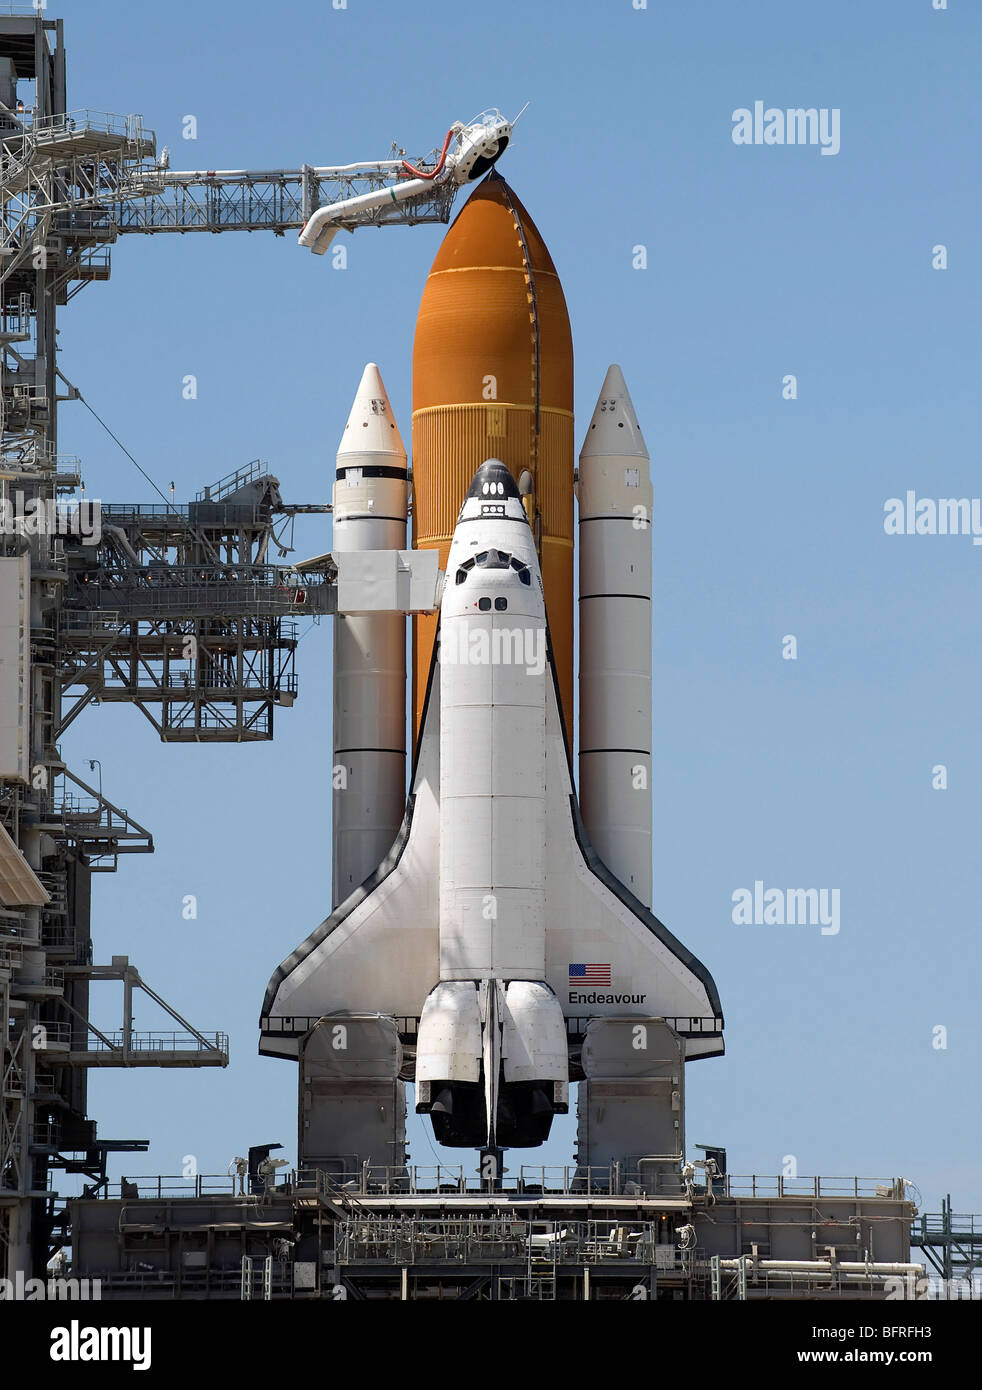 July 11, 2009 - The space shuttle Endeavour is seen at launch pad 39A at NASA's Kennedy Space Center in Cape Canaveral, Florida. Stock Photo